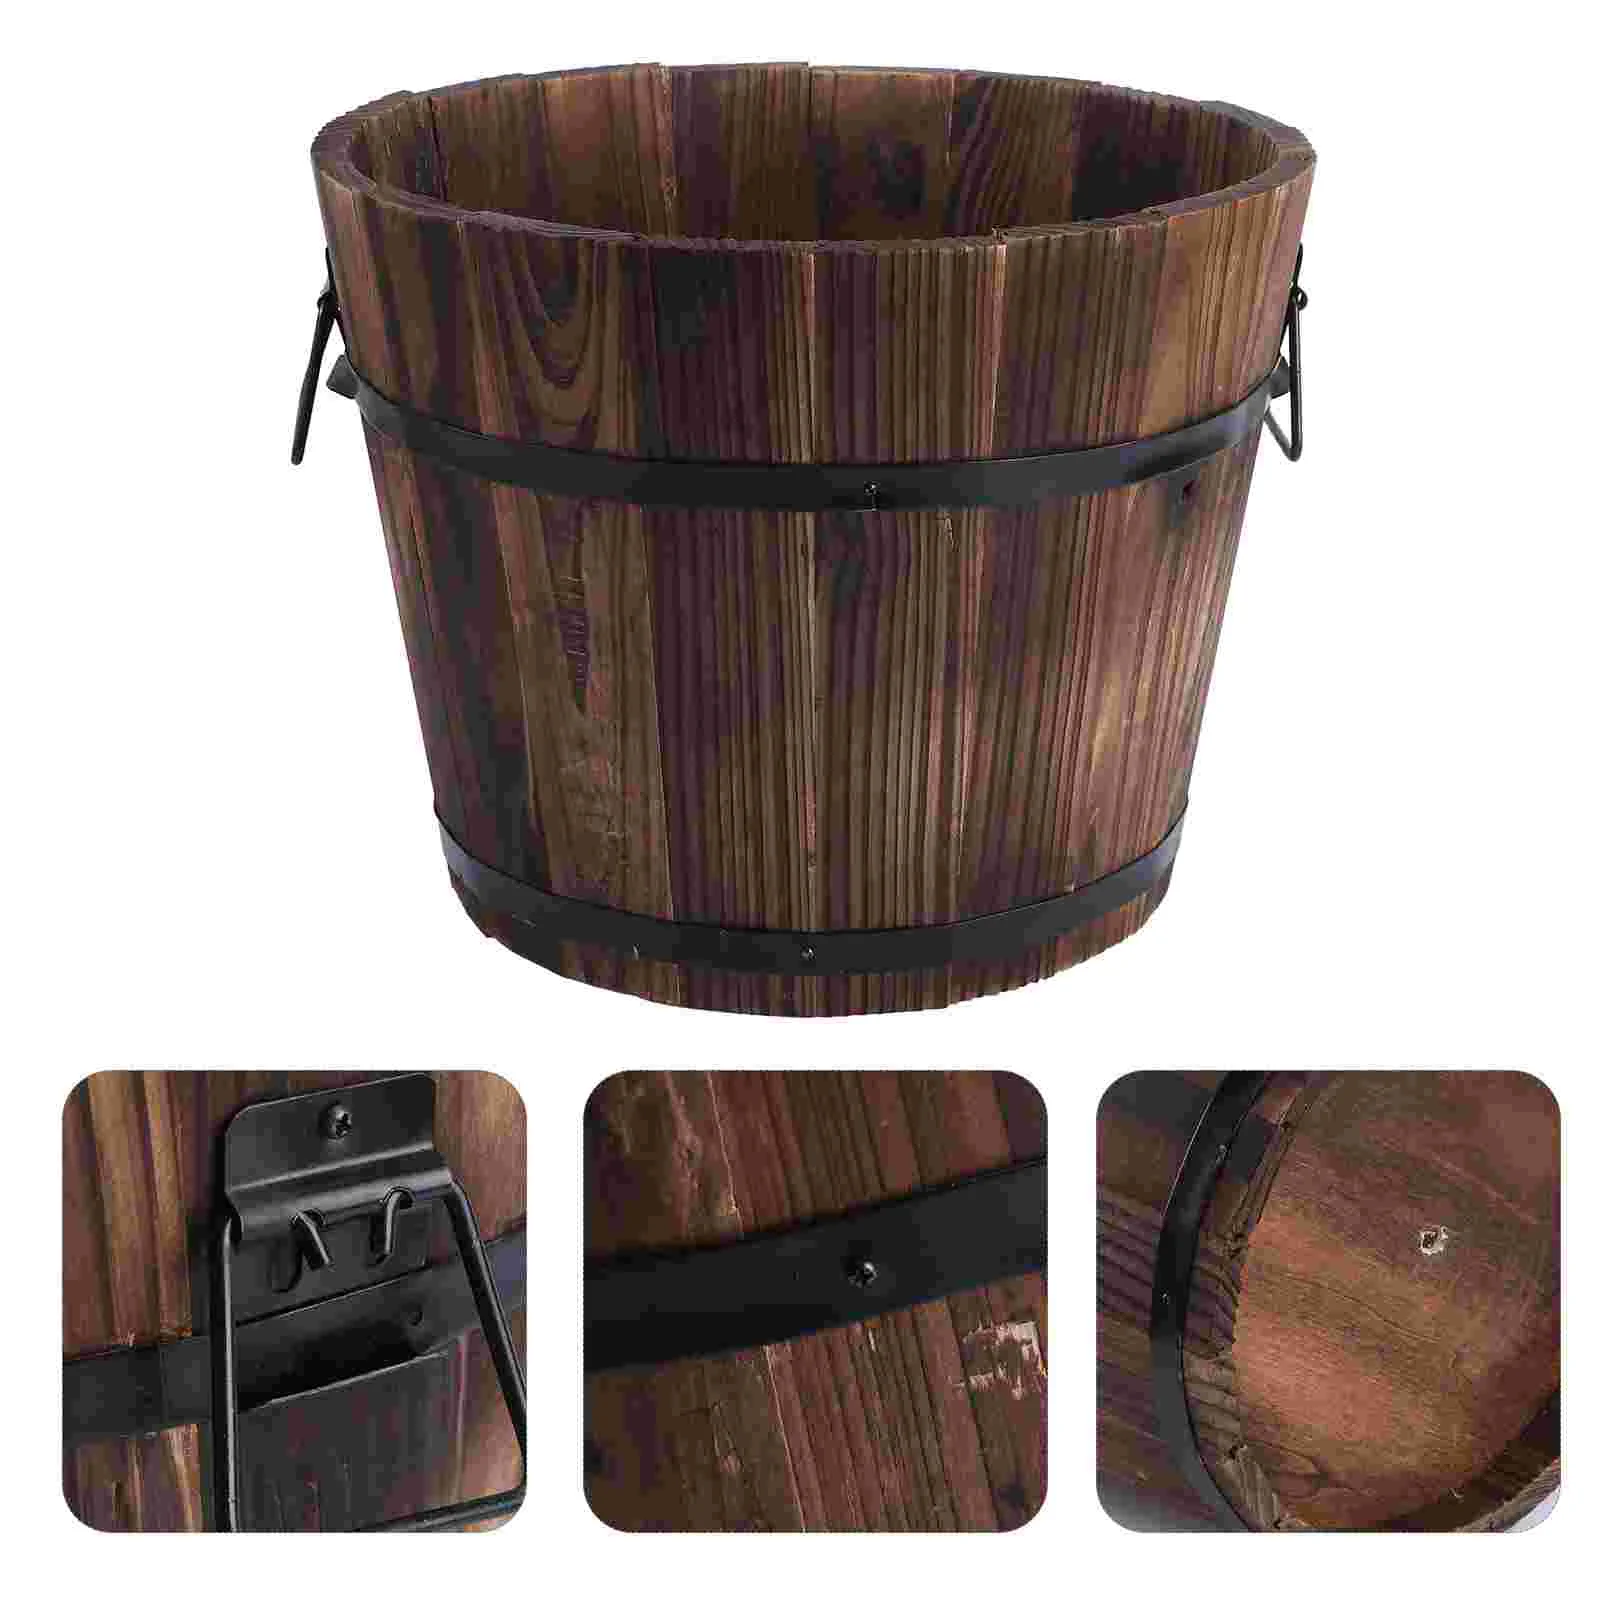 

Wooden Planter Flower Wood Pot Bucket Planters Outdoor Succulent Rustic Whiskey Box Pots Container Round Garden Boxes Decorative